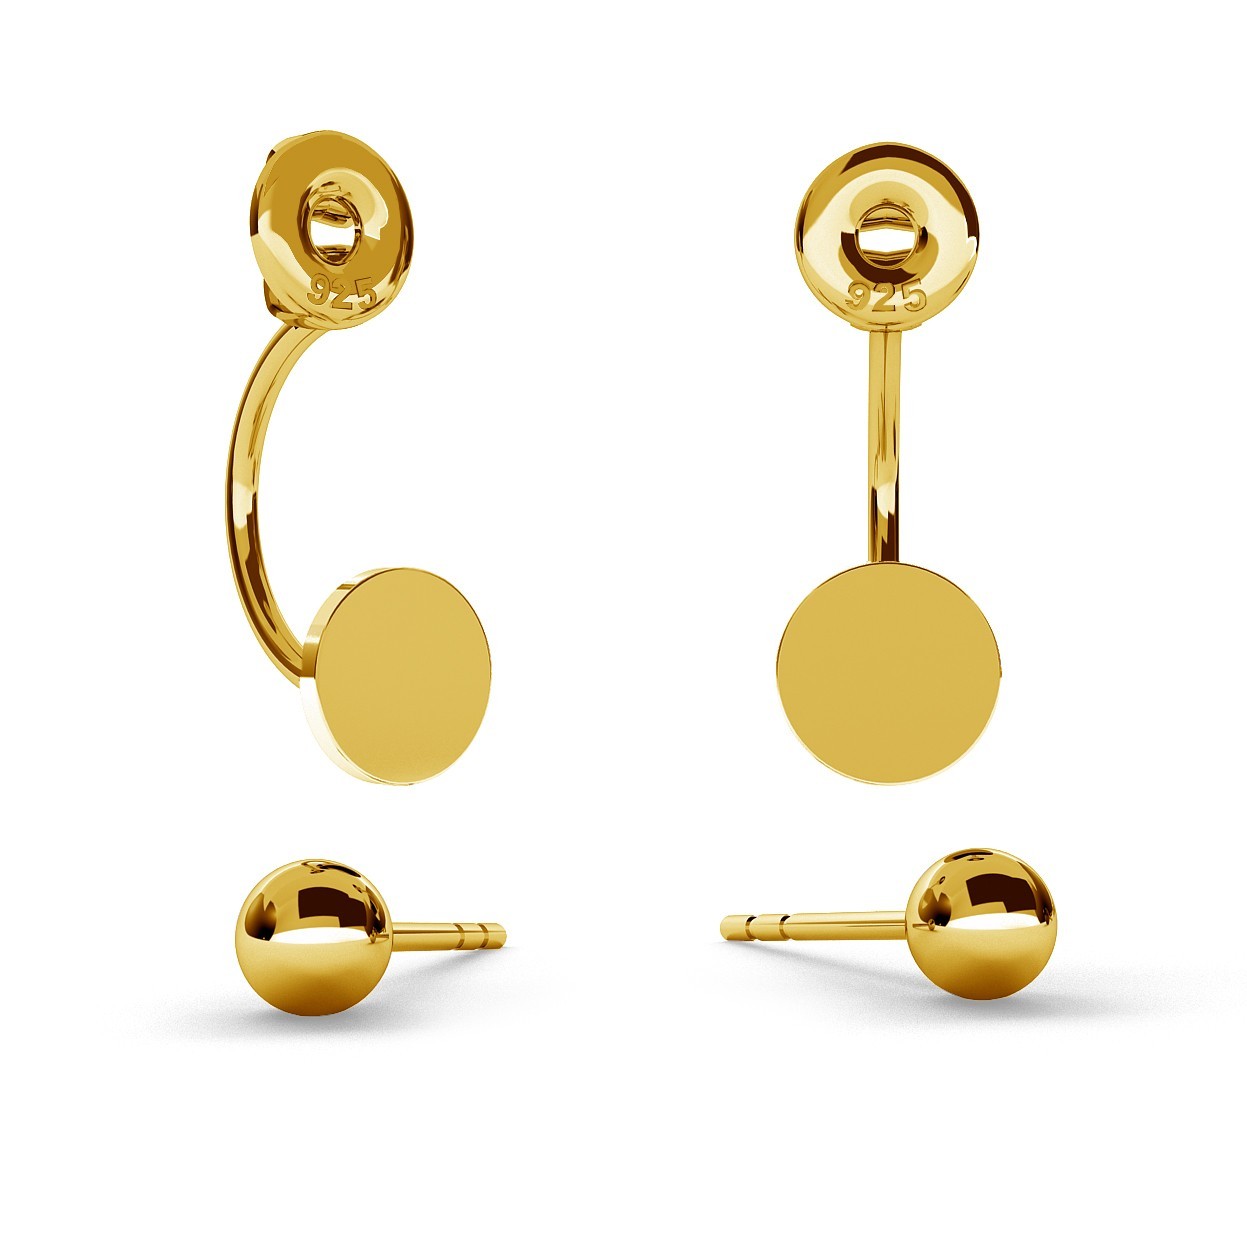 SWING EARRINGS BALL & CIRCLE WITH ENGRAVE